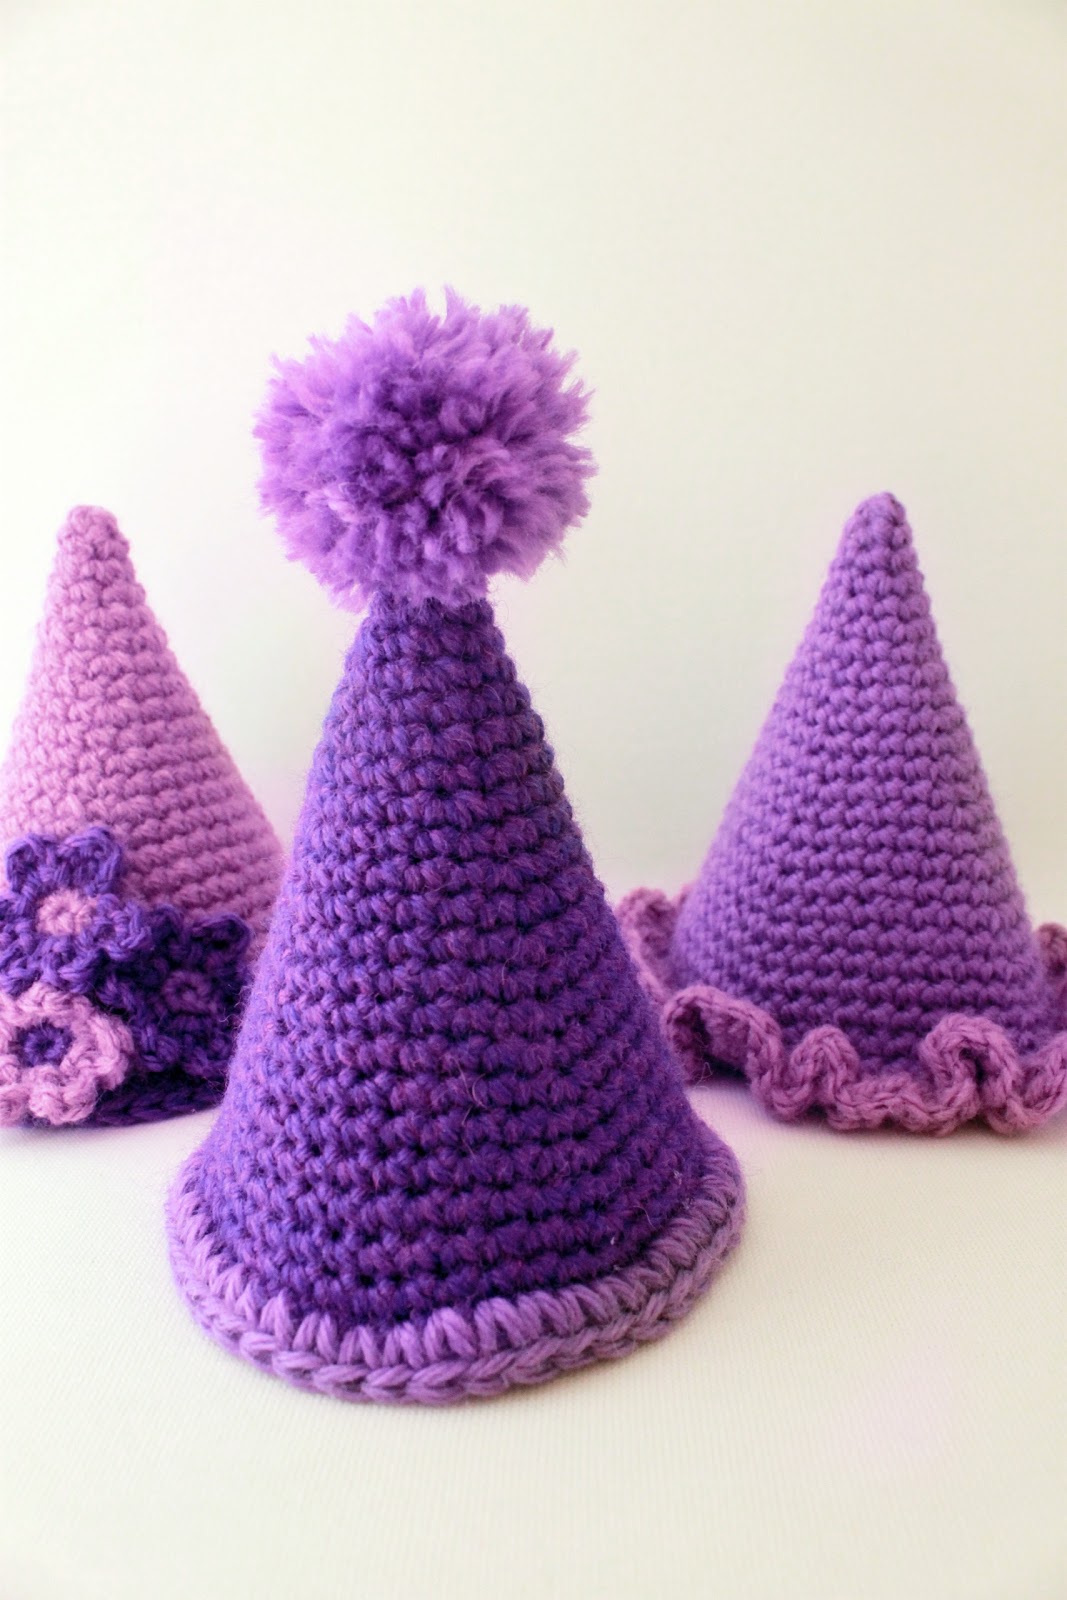 CROCHET AND KNIT GROUP - SIMPLE BEGINNER PATTERNS FOR KNITTERS AND